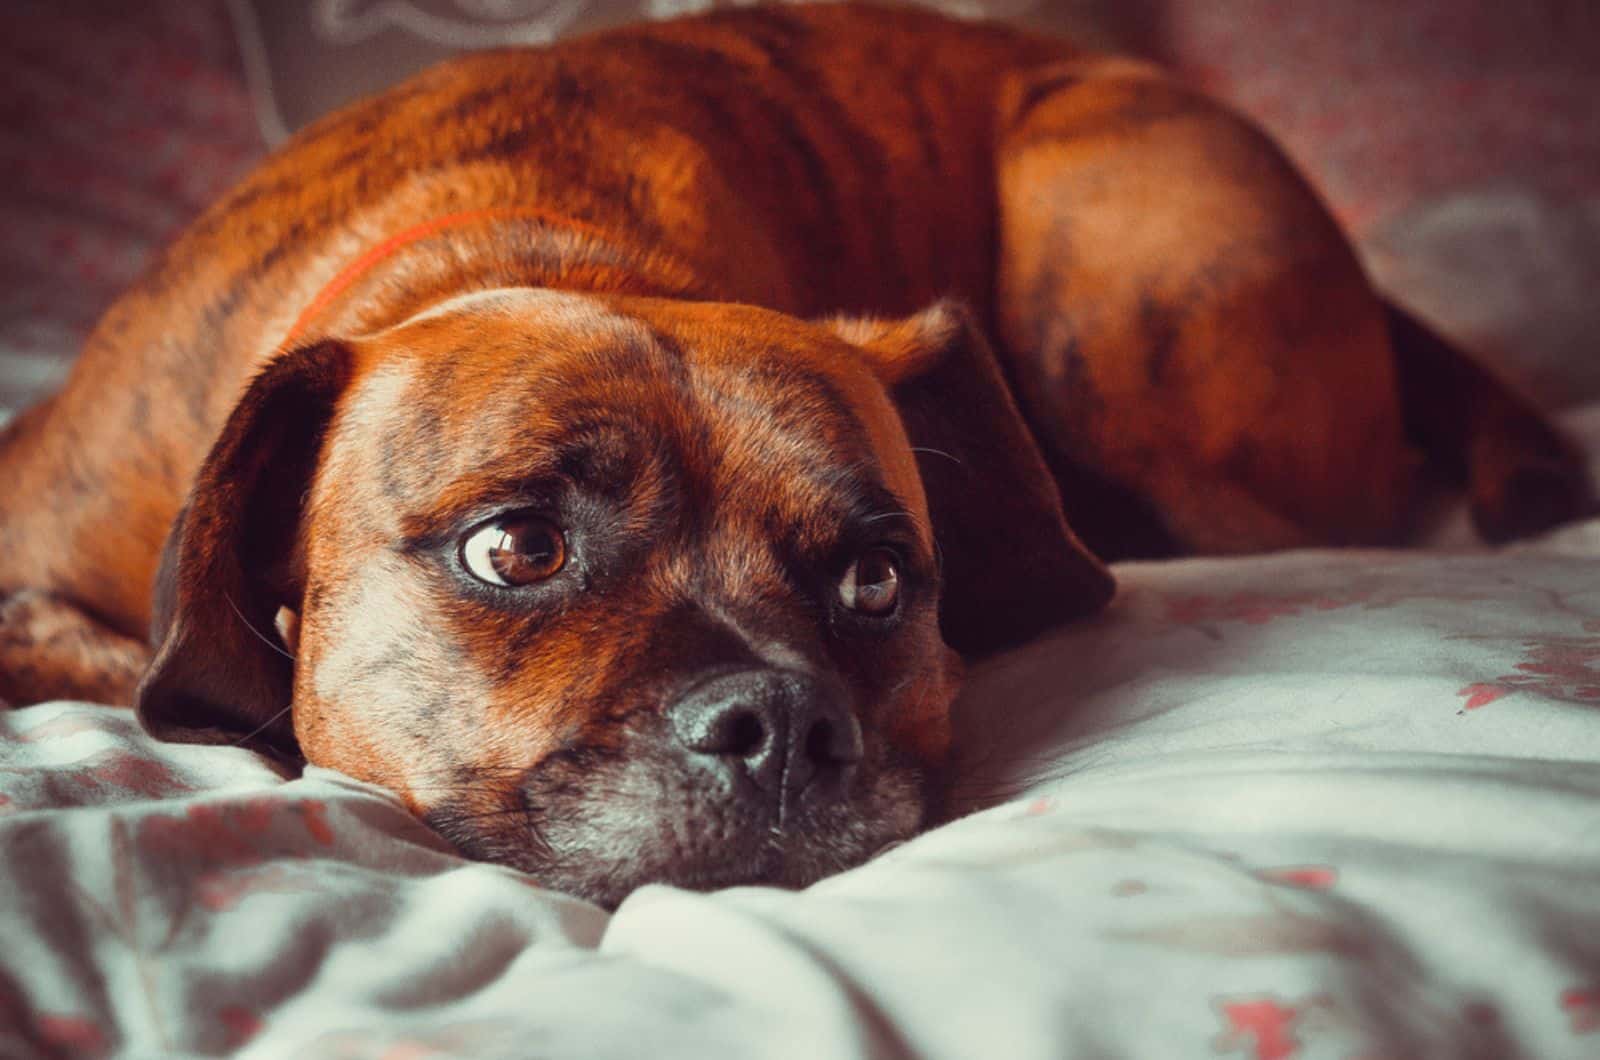 These Are The Reasons Why Your Dog Looks So Sad